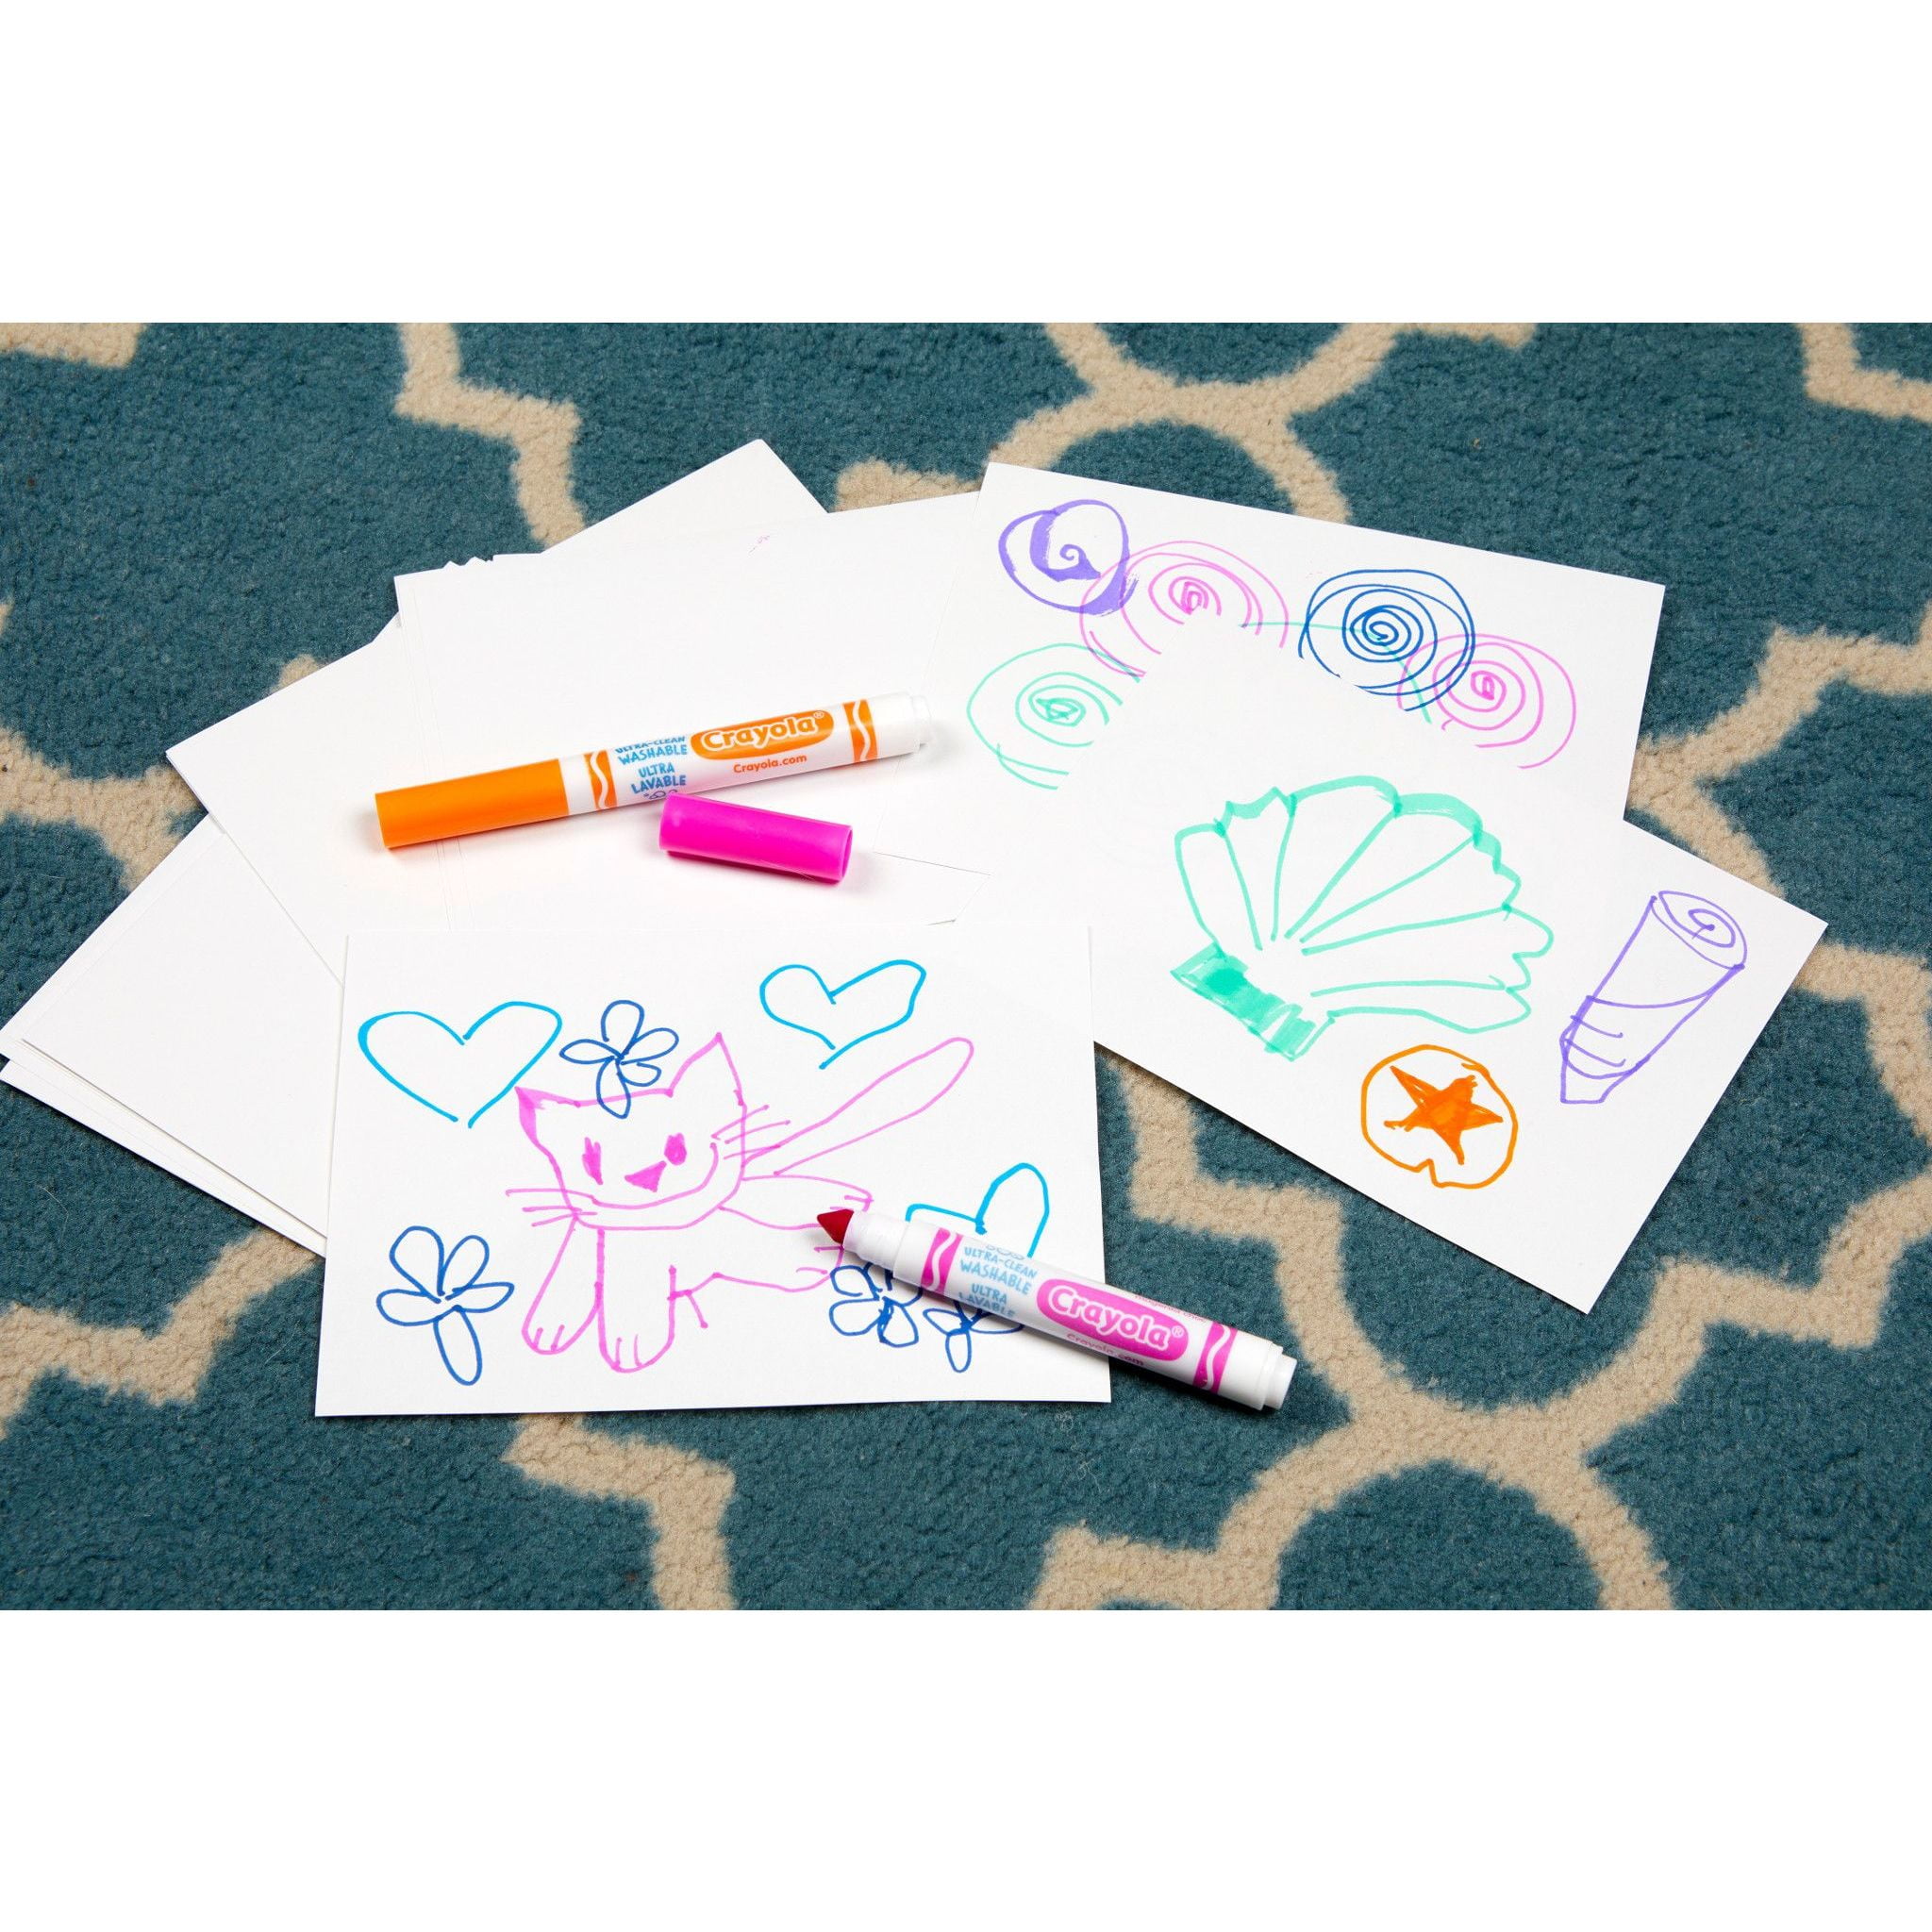 Crayola Gel FX Washable Markers – Art Therapy